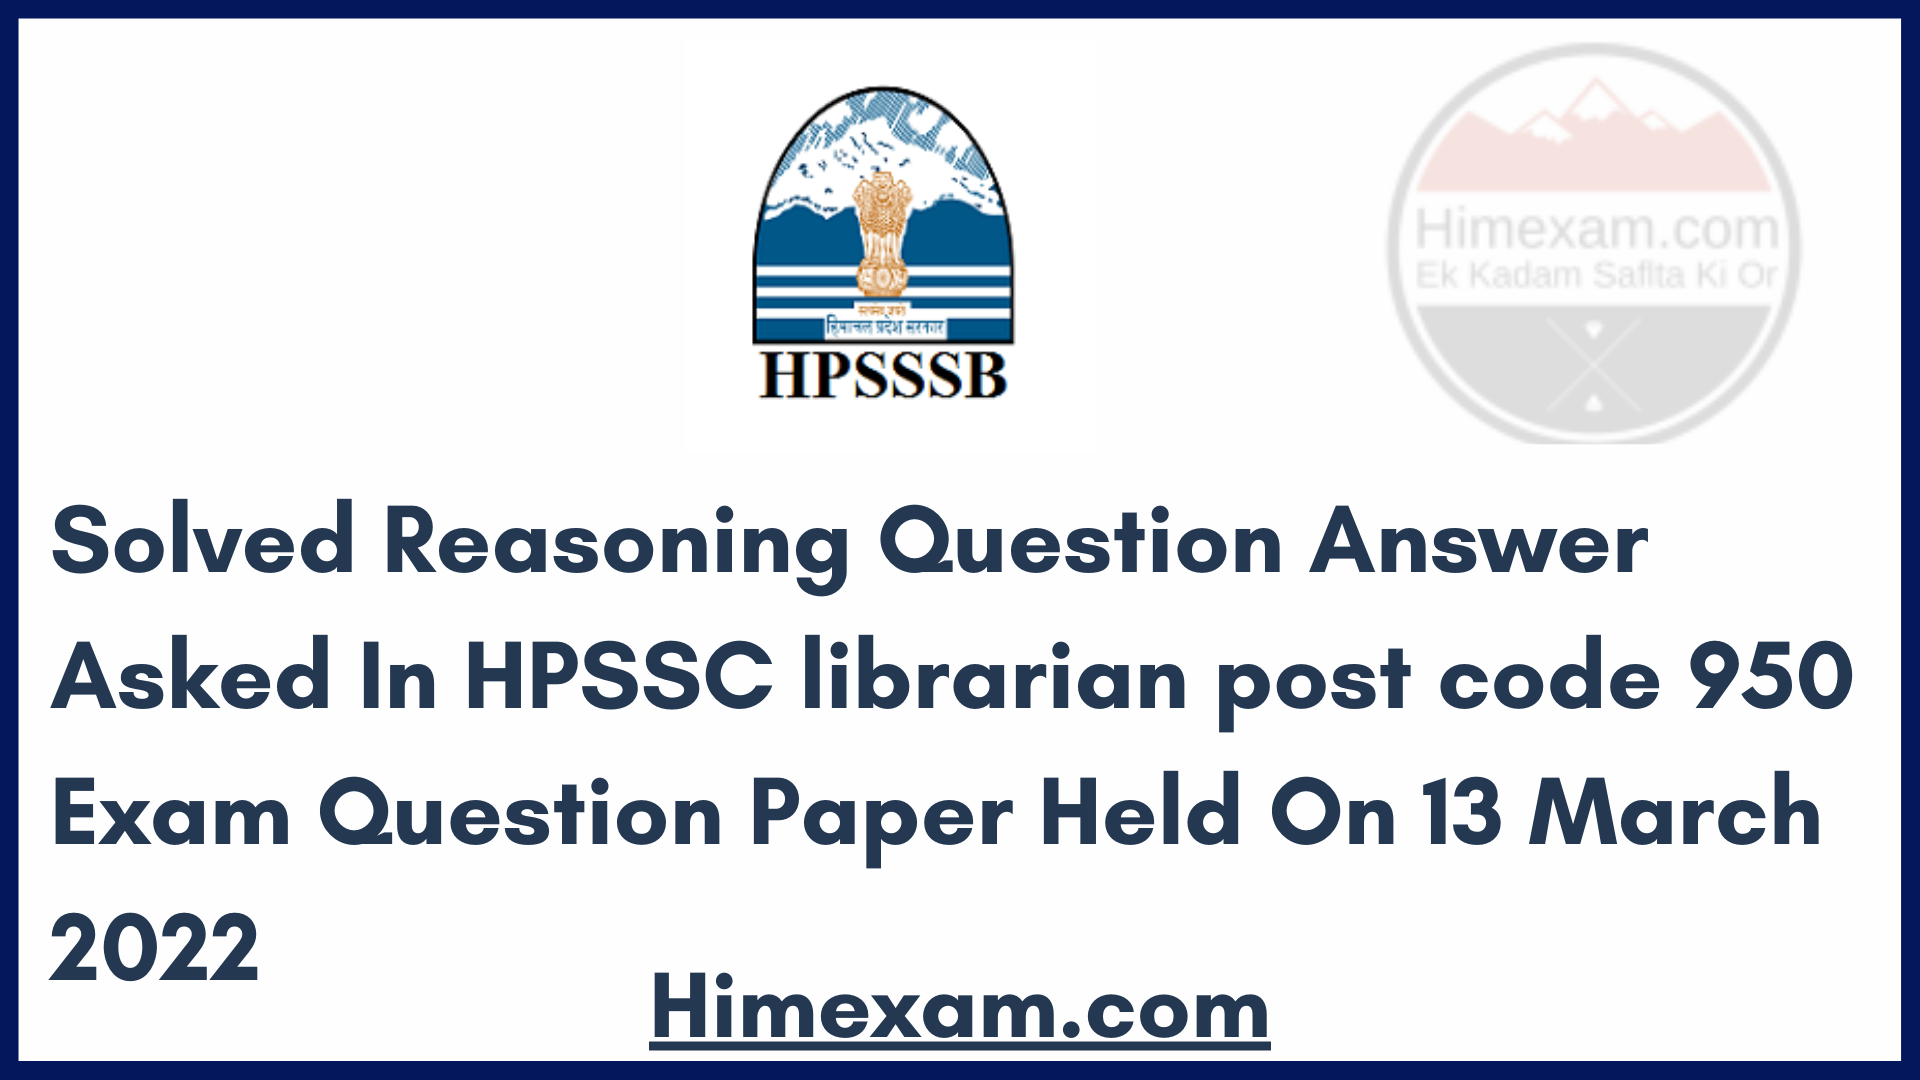 Solved Reasoning Question Answer Asked In HPSSC librarian post code 950  Exam Question Paper Held On 13 March 2022